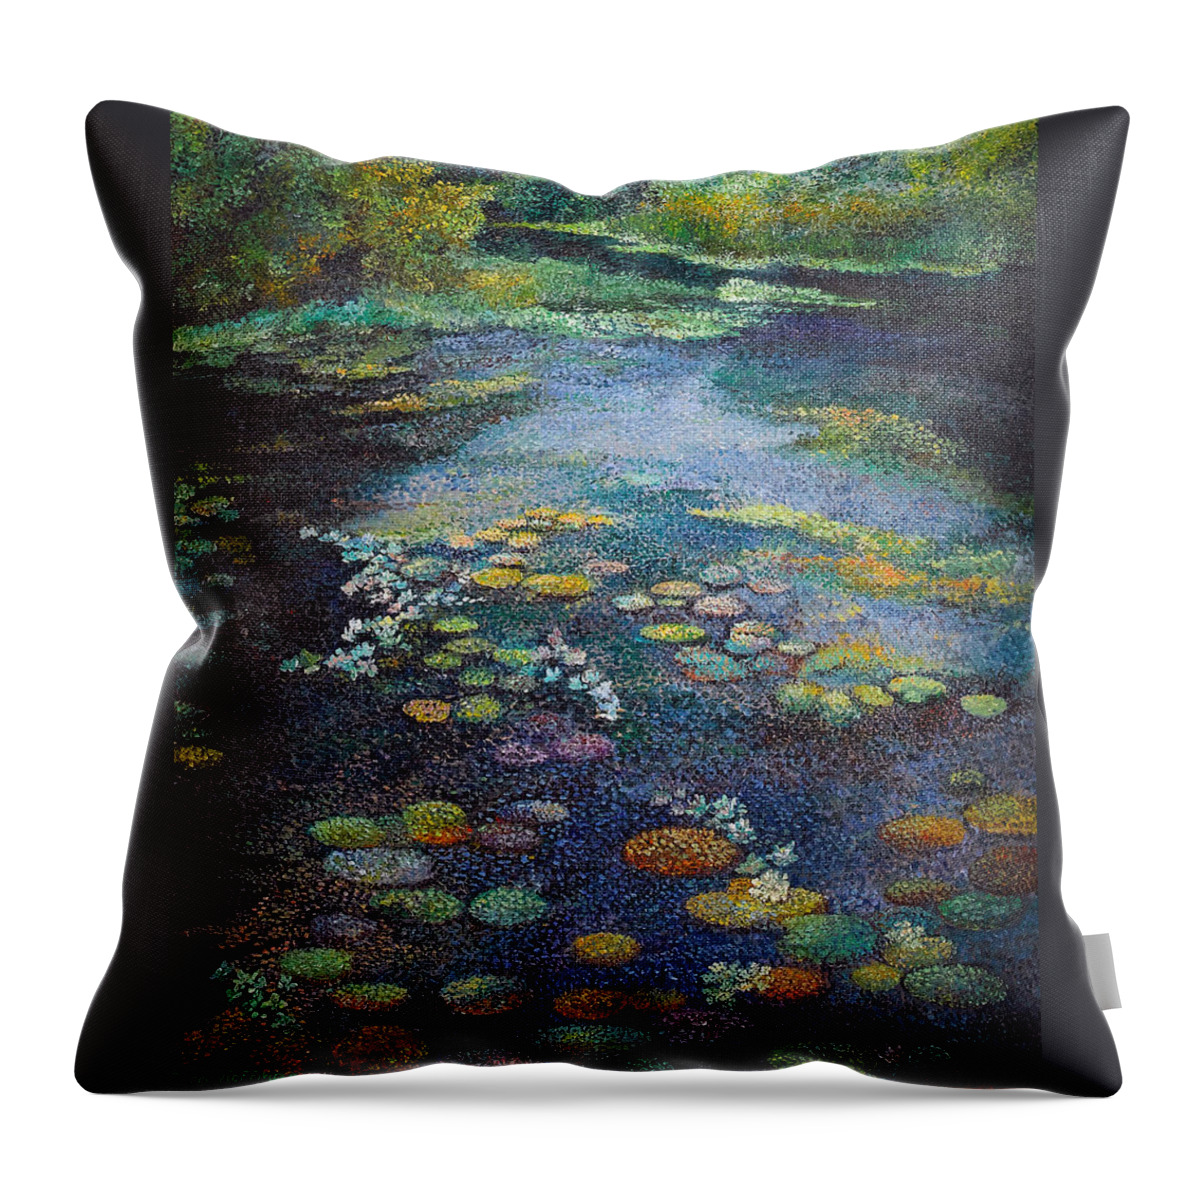  Throw Pillow featuring the painting Vancouver's Water Lily Pond, an Inspiration by Rita Hoffman Shulak